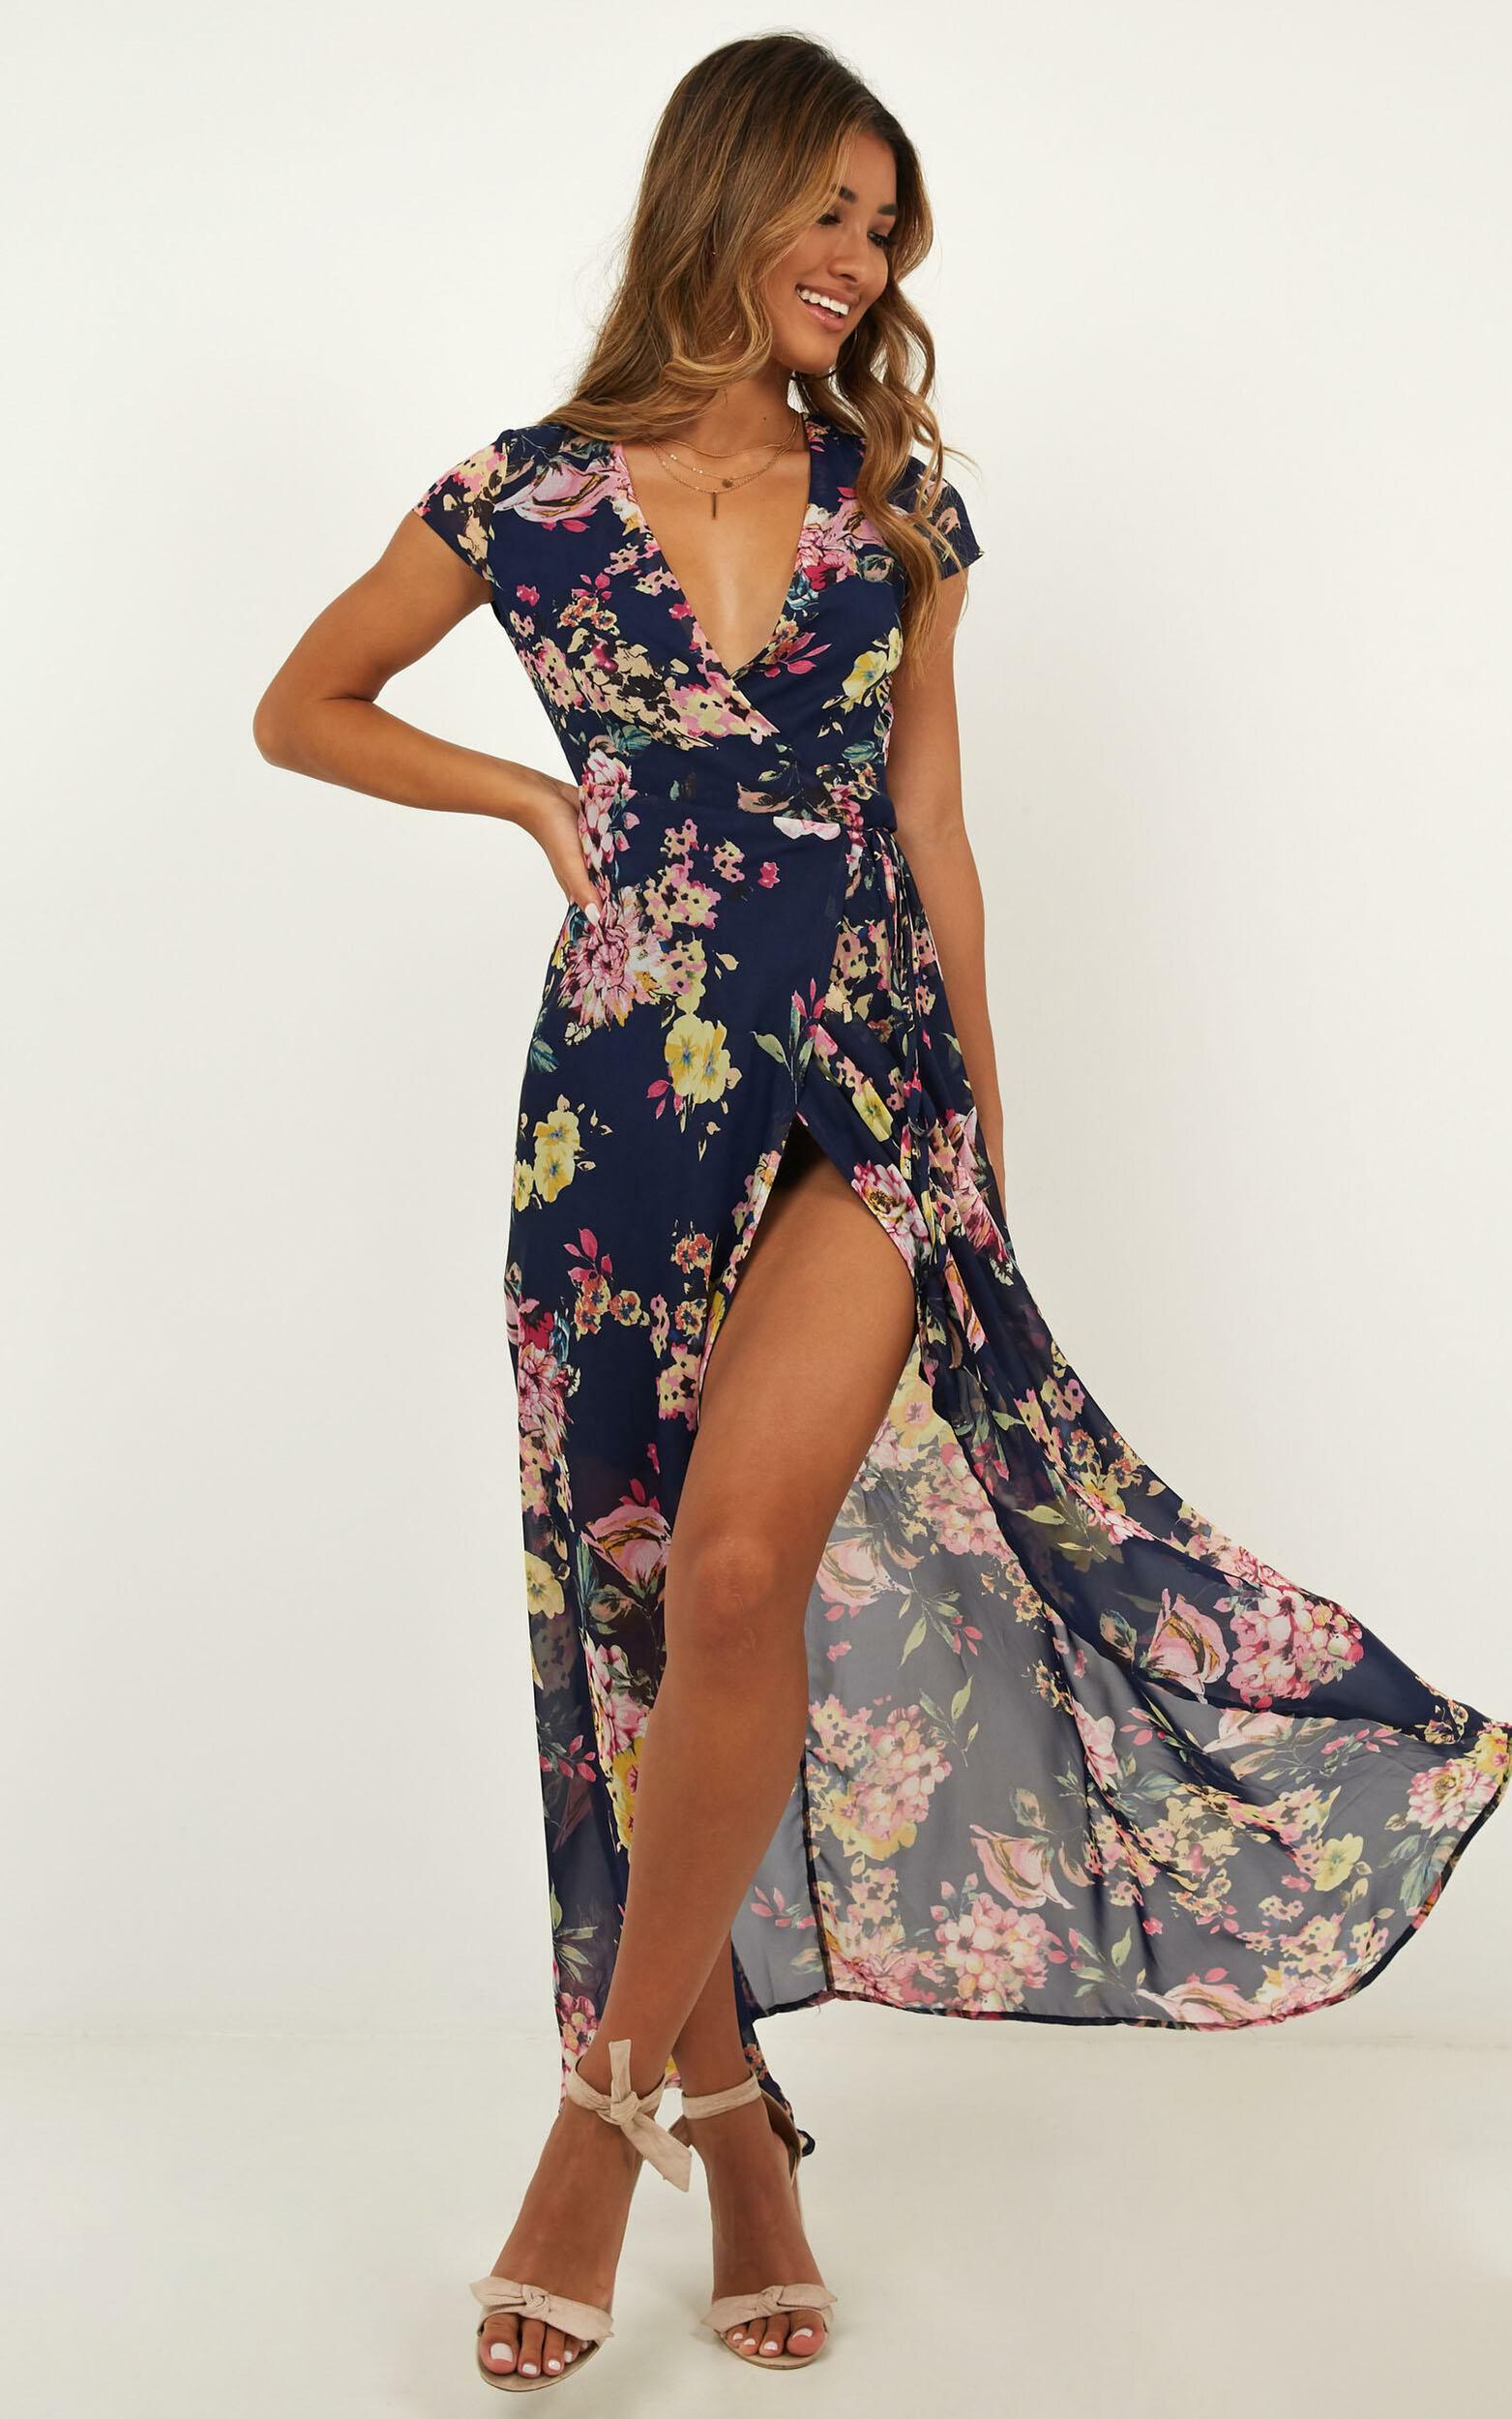 Wrap And Cross Maxi Dress in Navy Floral - 6 (XS), NVY1